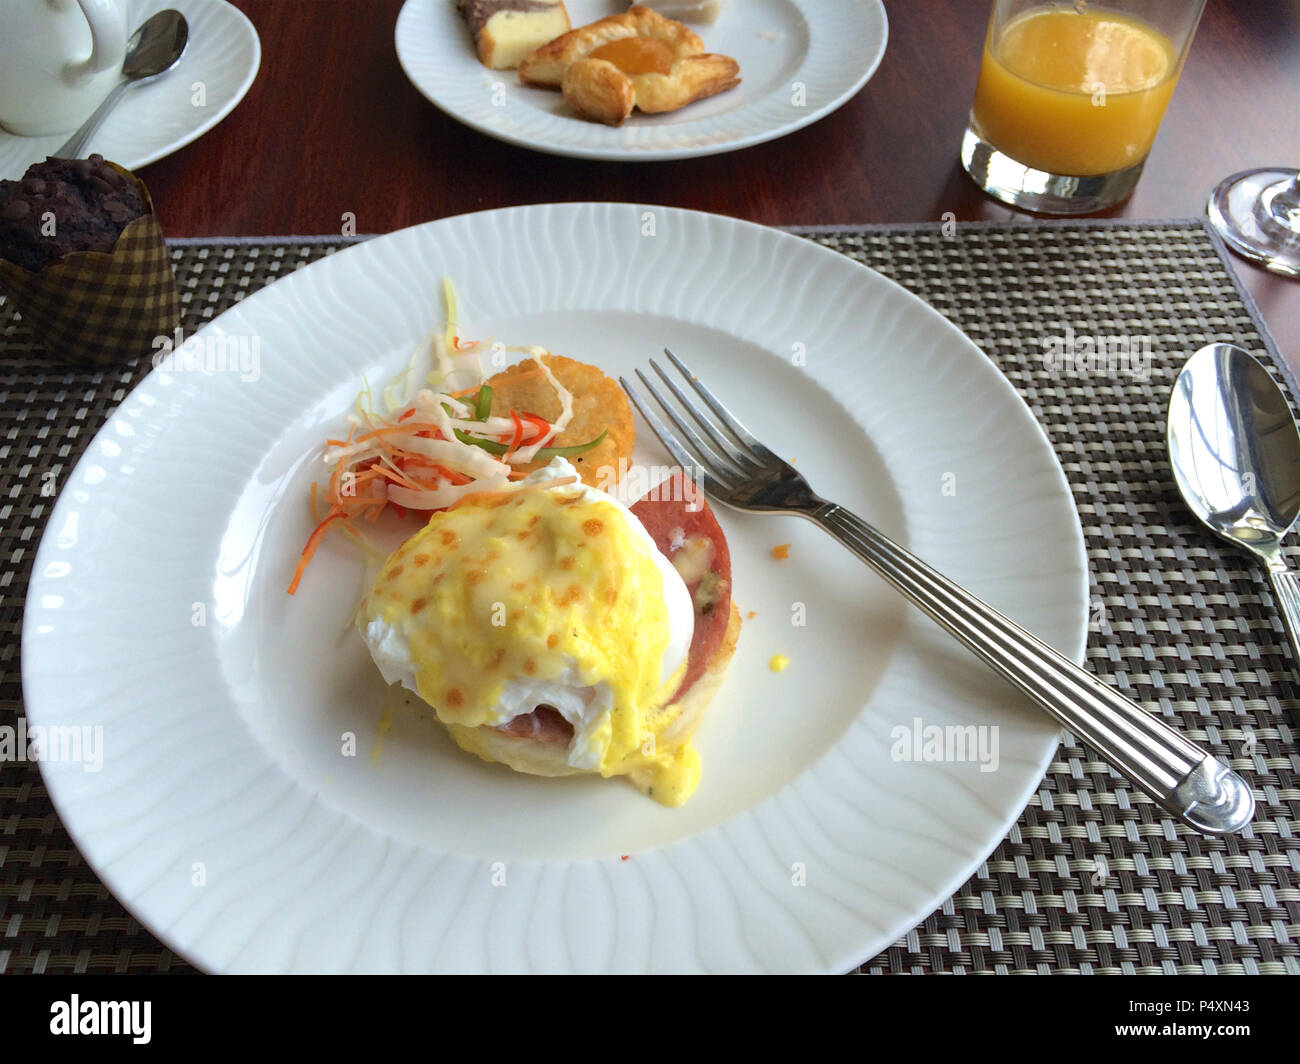 PULAU LANGKAWI, MALAYSIA - APR 6th 2015: Eggs Benedict is a traditional American breakfast or brunch dish with bacon, ham, a poached egg, and hollandaise sauce. Meal on a white plate in a luxury hotel restaurant Stock Photo